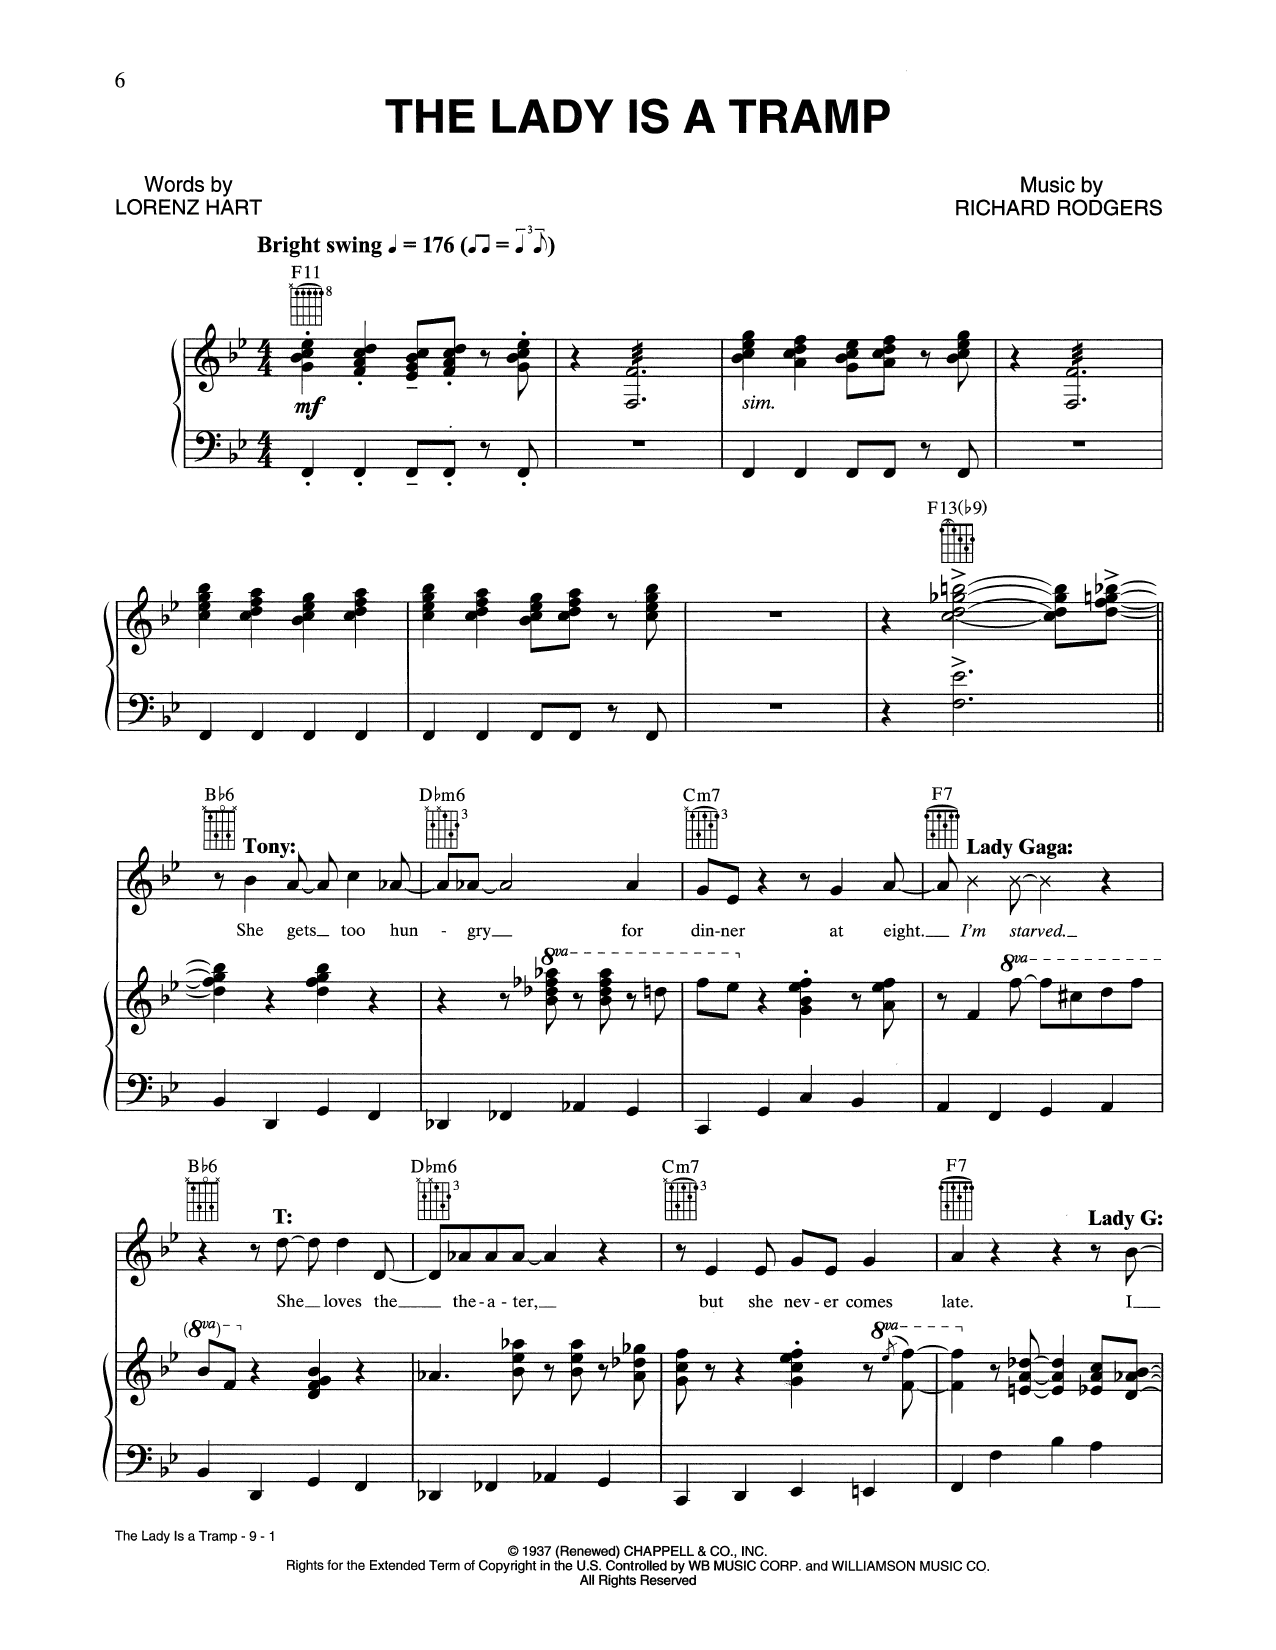 Download Tony Bennett & Lady Gaga The Lady Is A Tramp Sheet Music